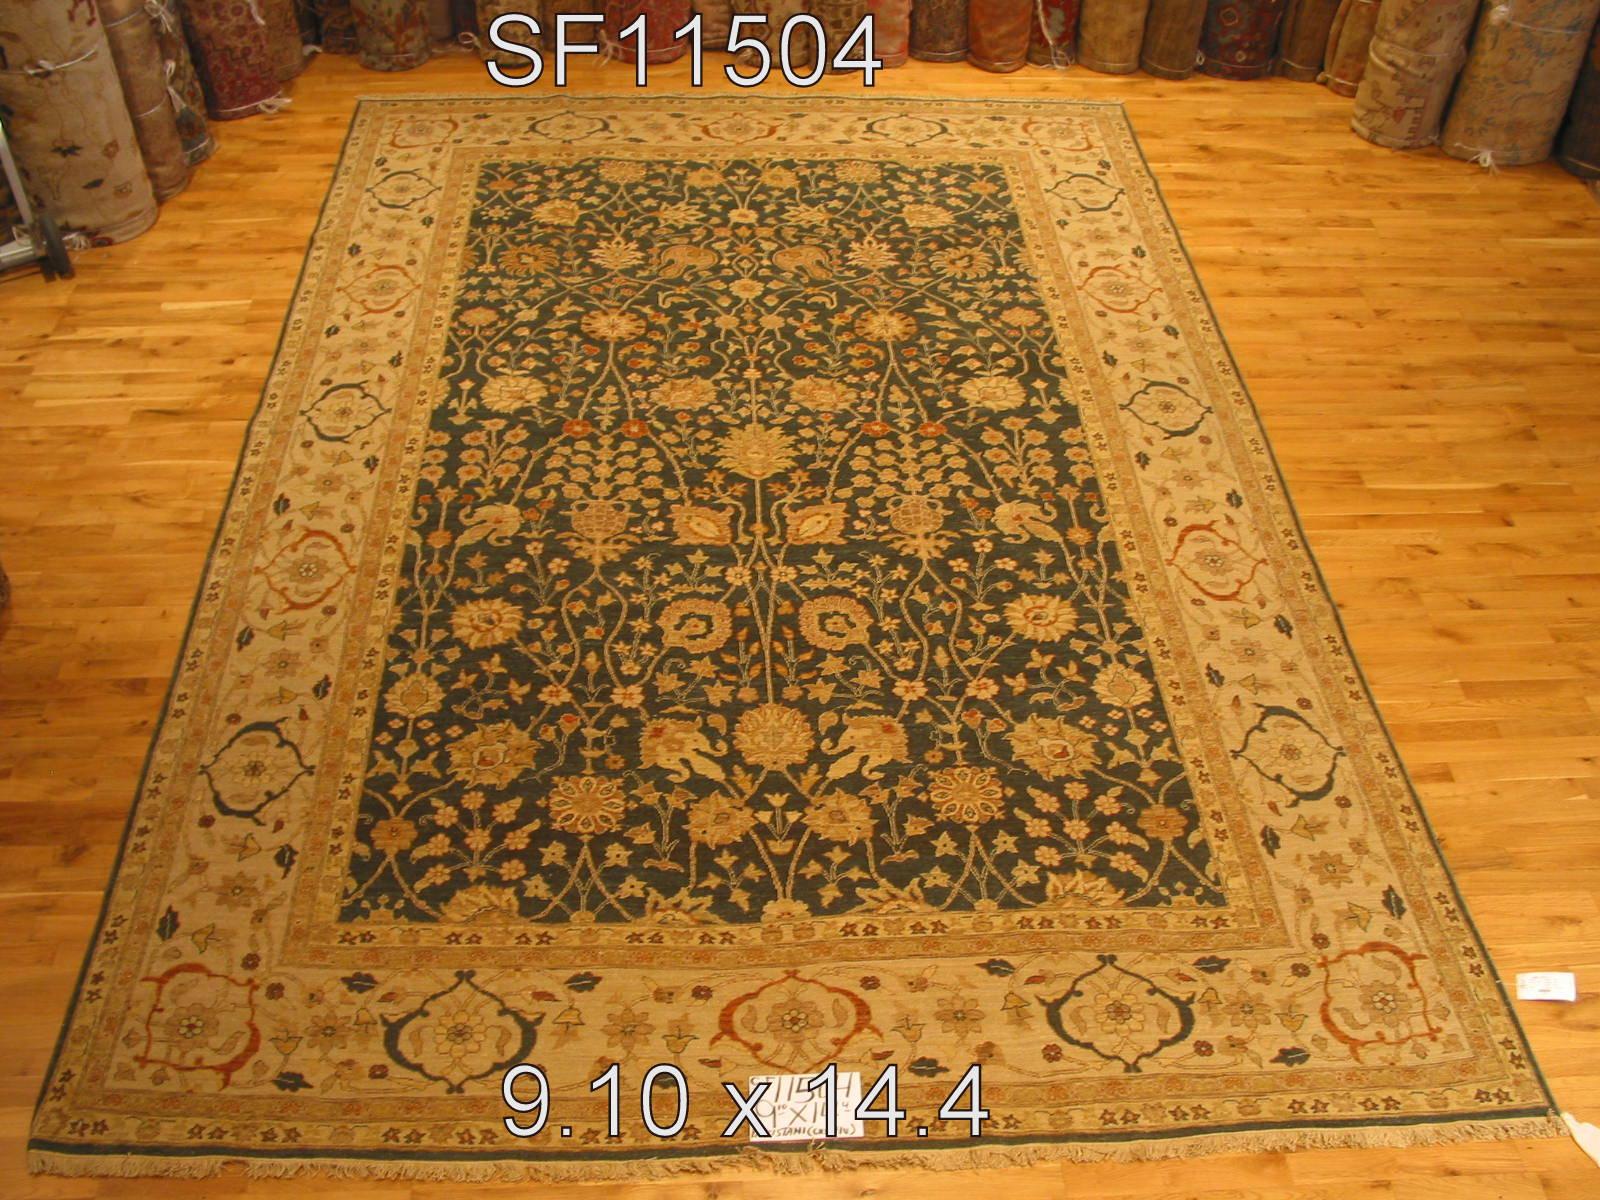 Bring the blooming garden indoors with this unusual traditional style wool area rug that will be equally at home in formal and informal settings. Dark forest green center panel and ivory border with beige, rust, taupe and yellow/gold elements. Hand